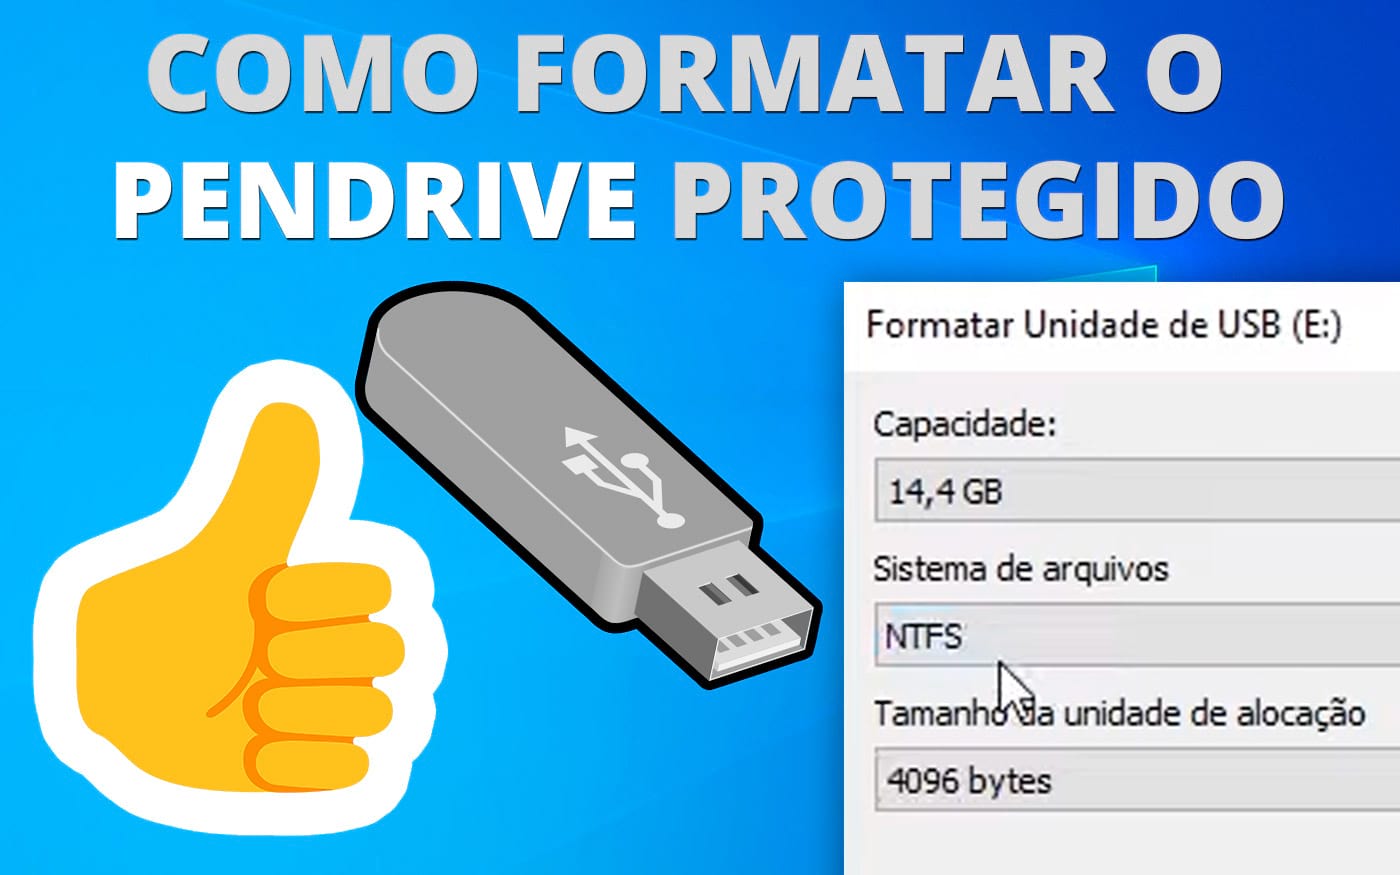 How to format a write-protected flash drive?